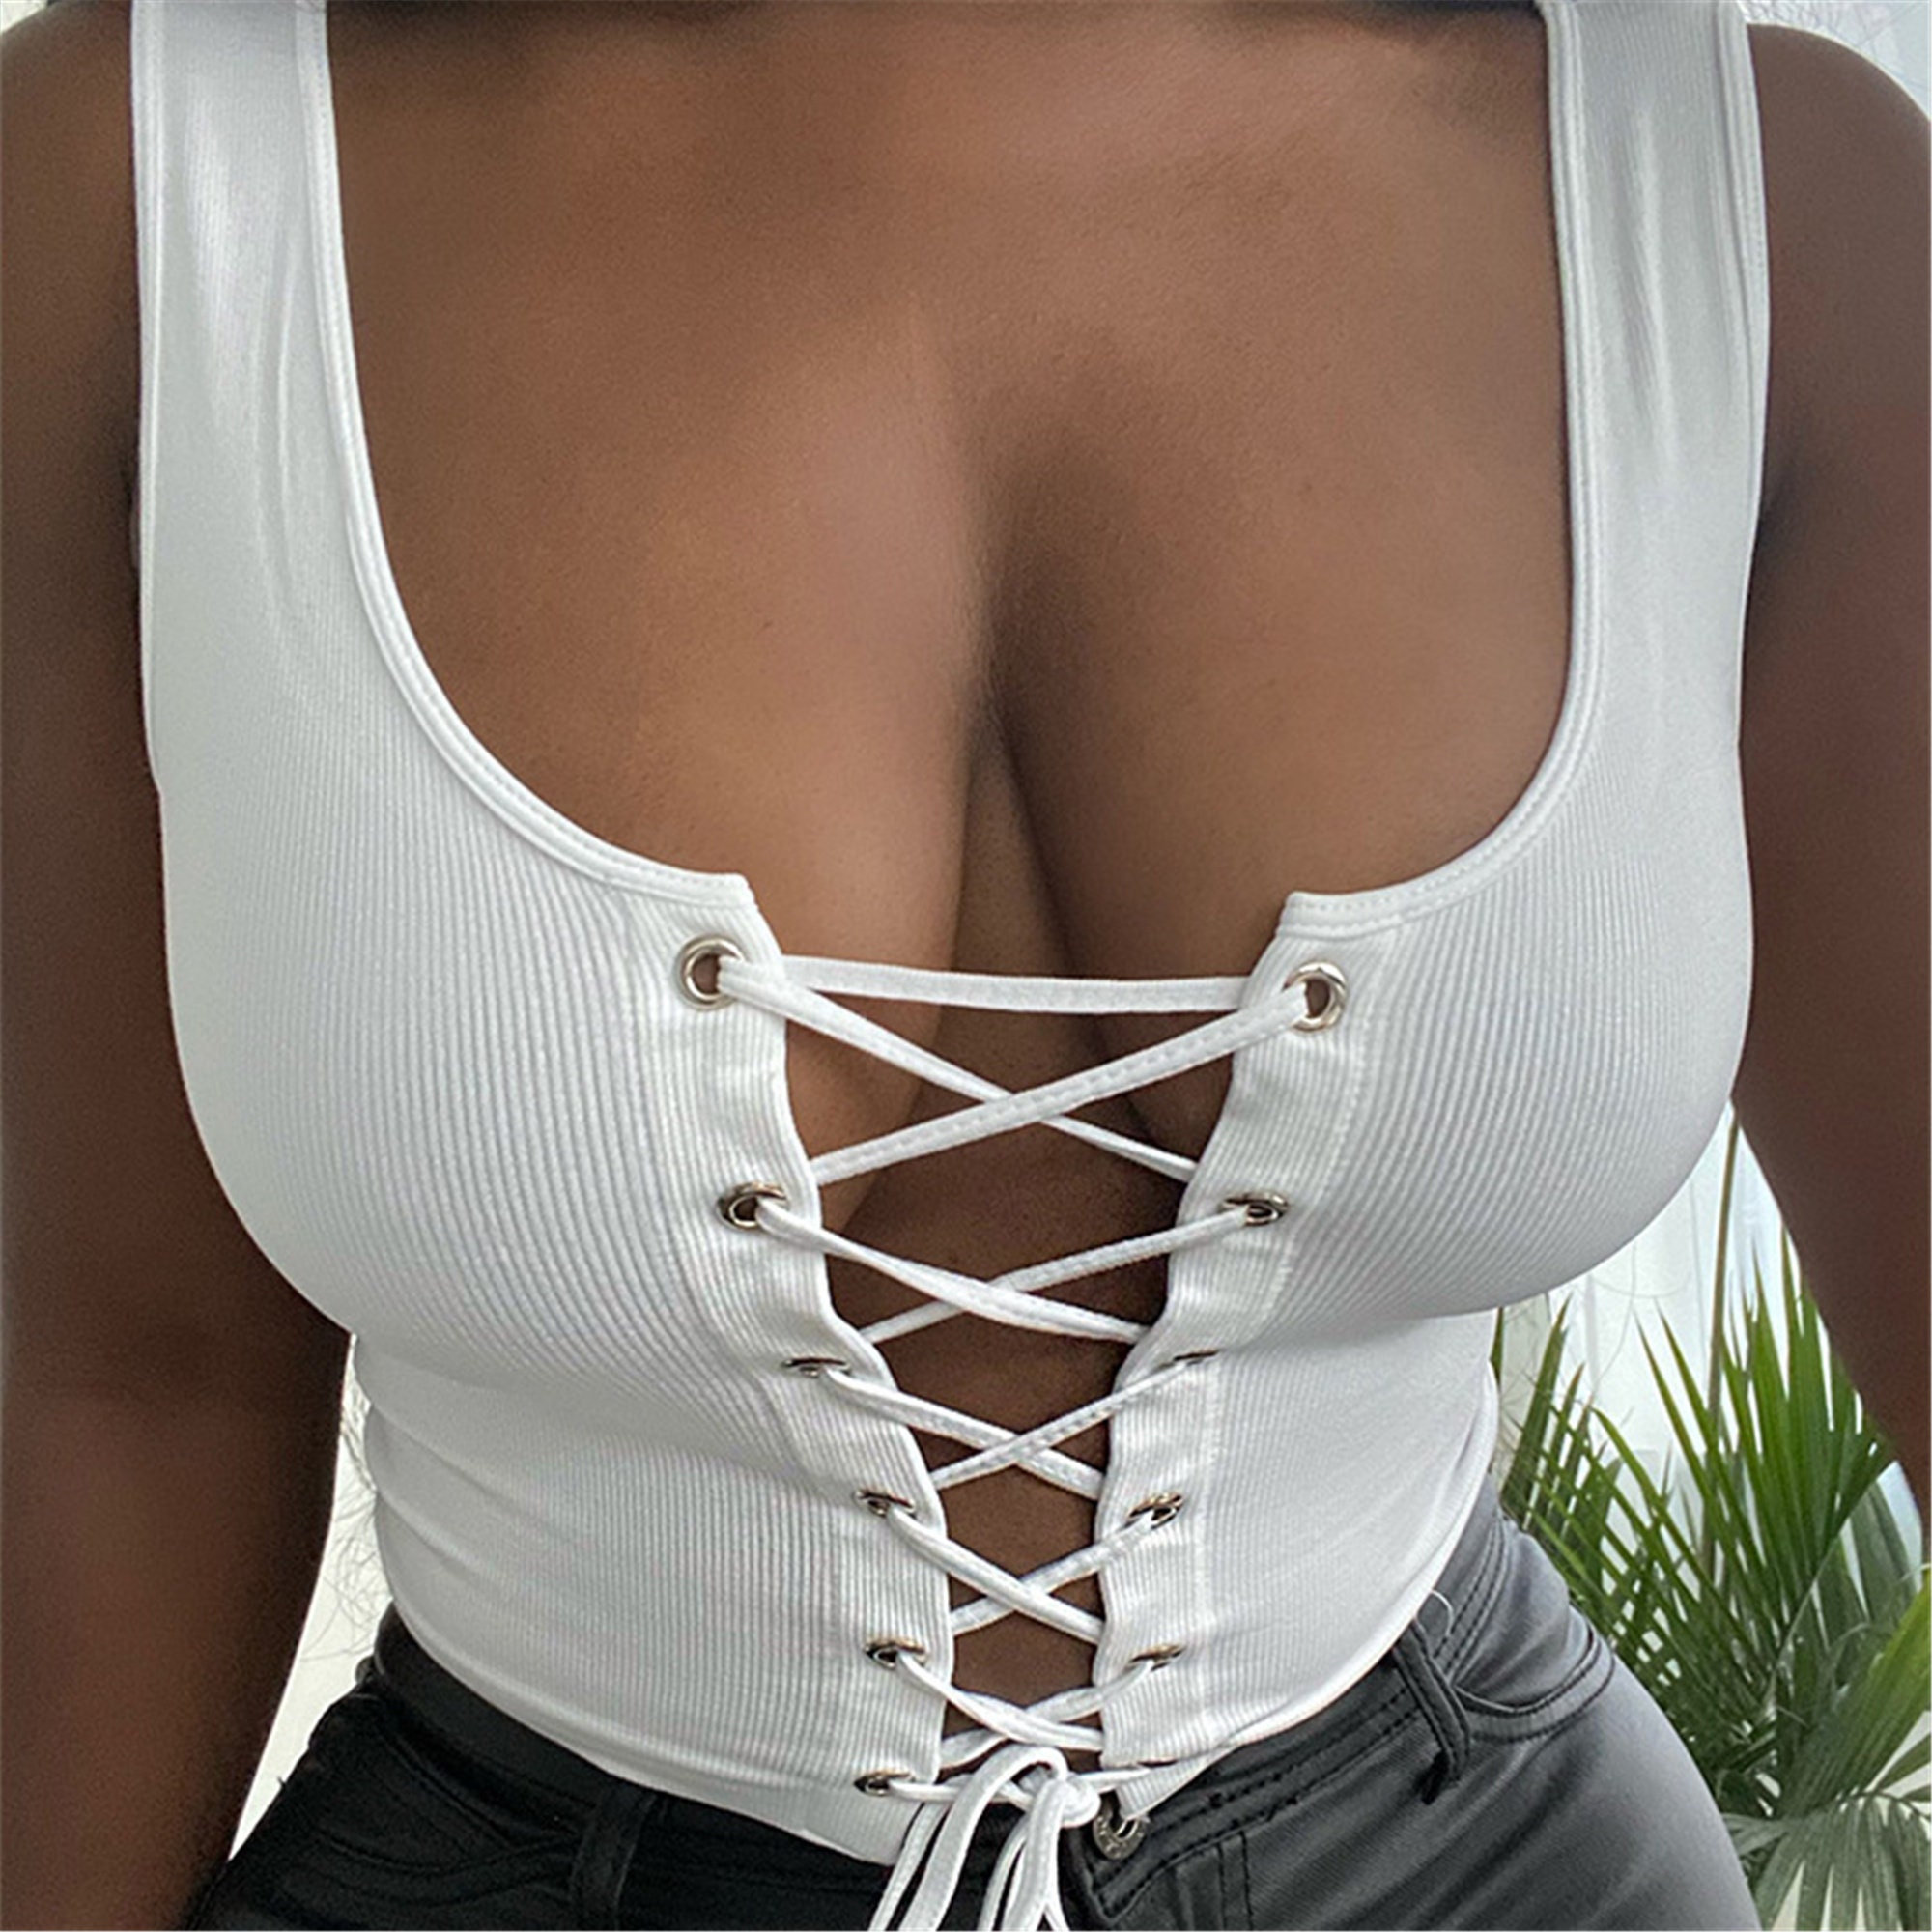 Cleavage Tank Top Lace Up Tops Tees White Tank Top Sexy Fashion Streetwear Low Cut Bodycon Crop Top Basic Top Gift For Her